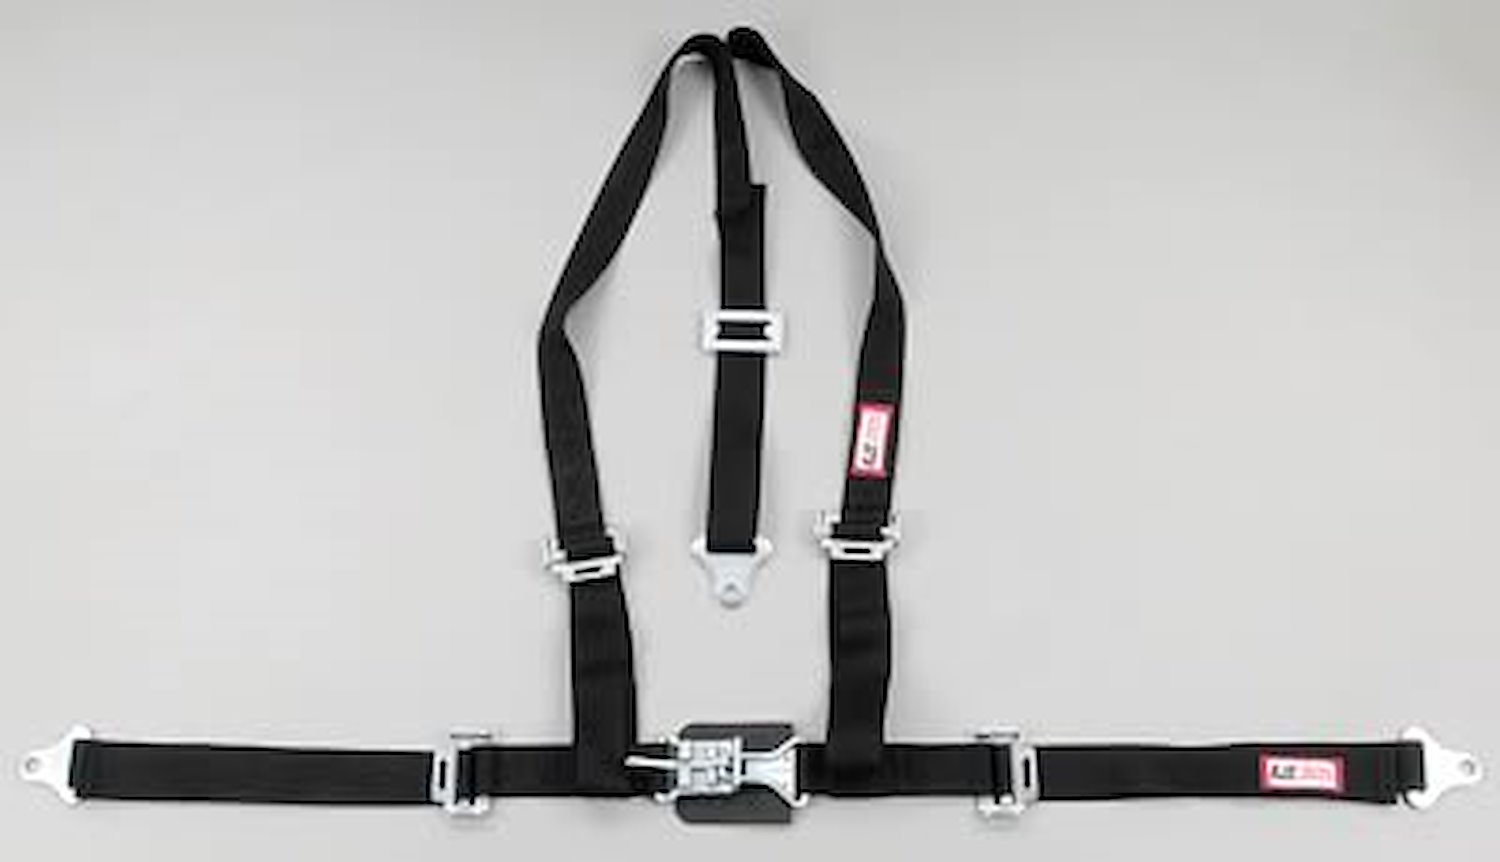 NON-SFI L&L HARNESS 2 PULL UP Lap Belt SNAP SEWN IN 2 S.H. Individual ROLL BAR Mount WRAP/SNAP RED